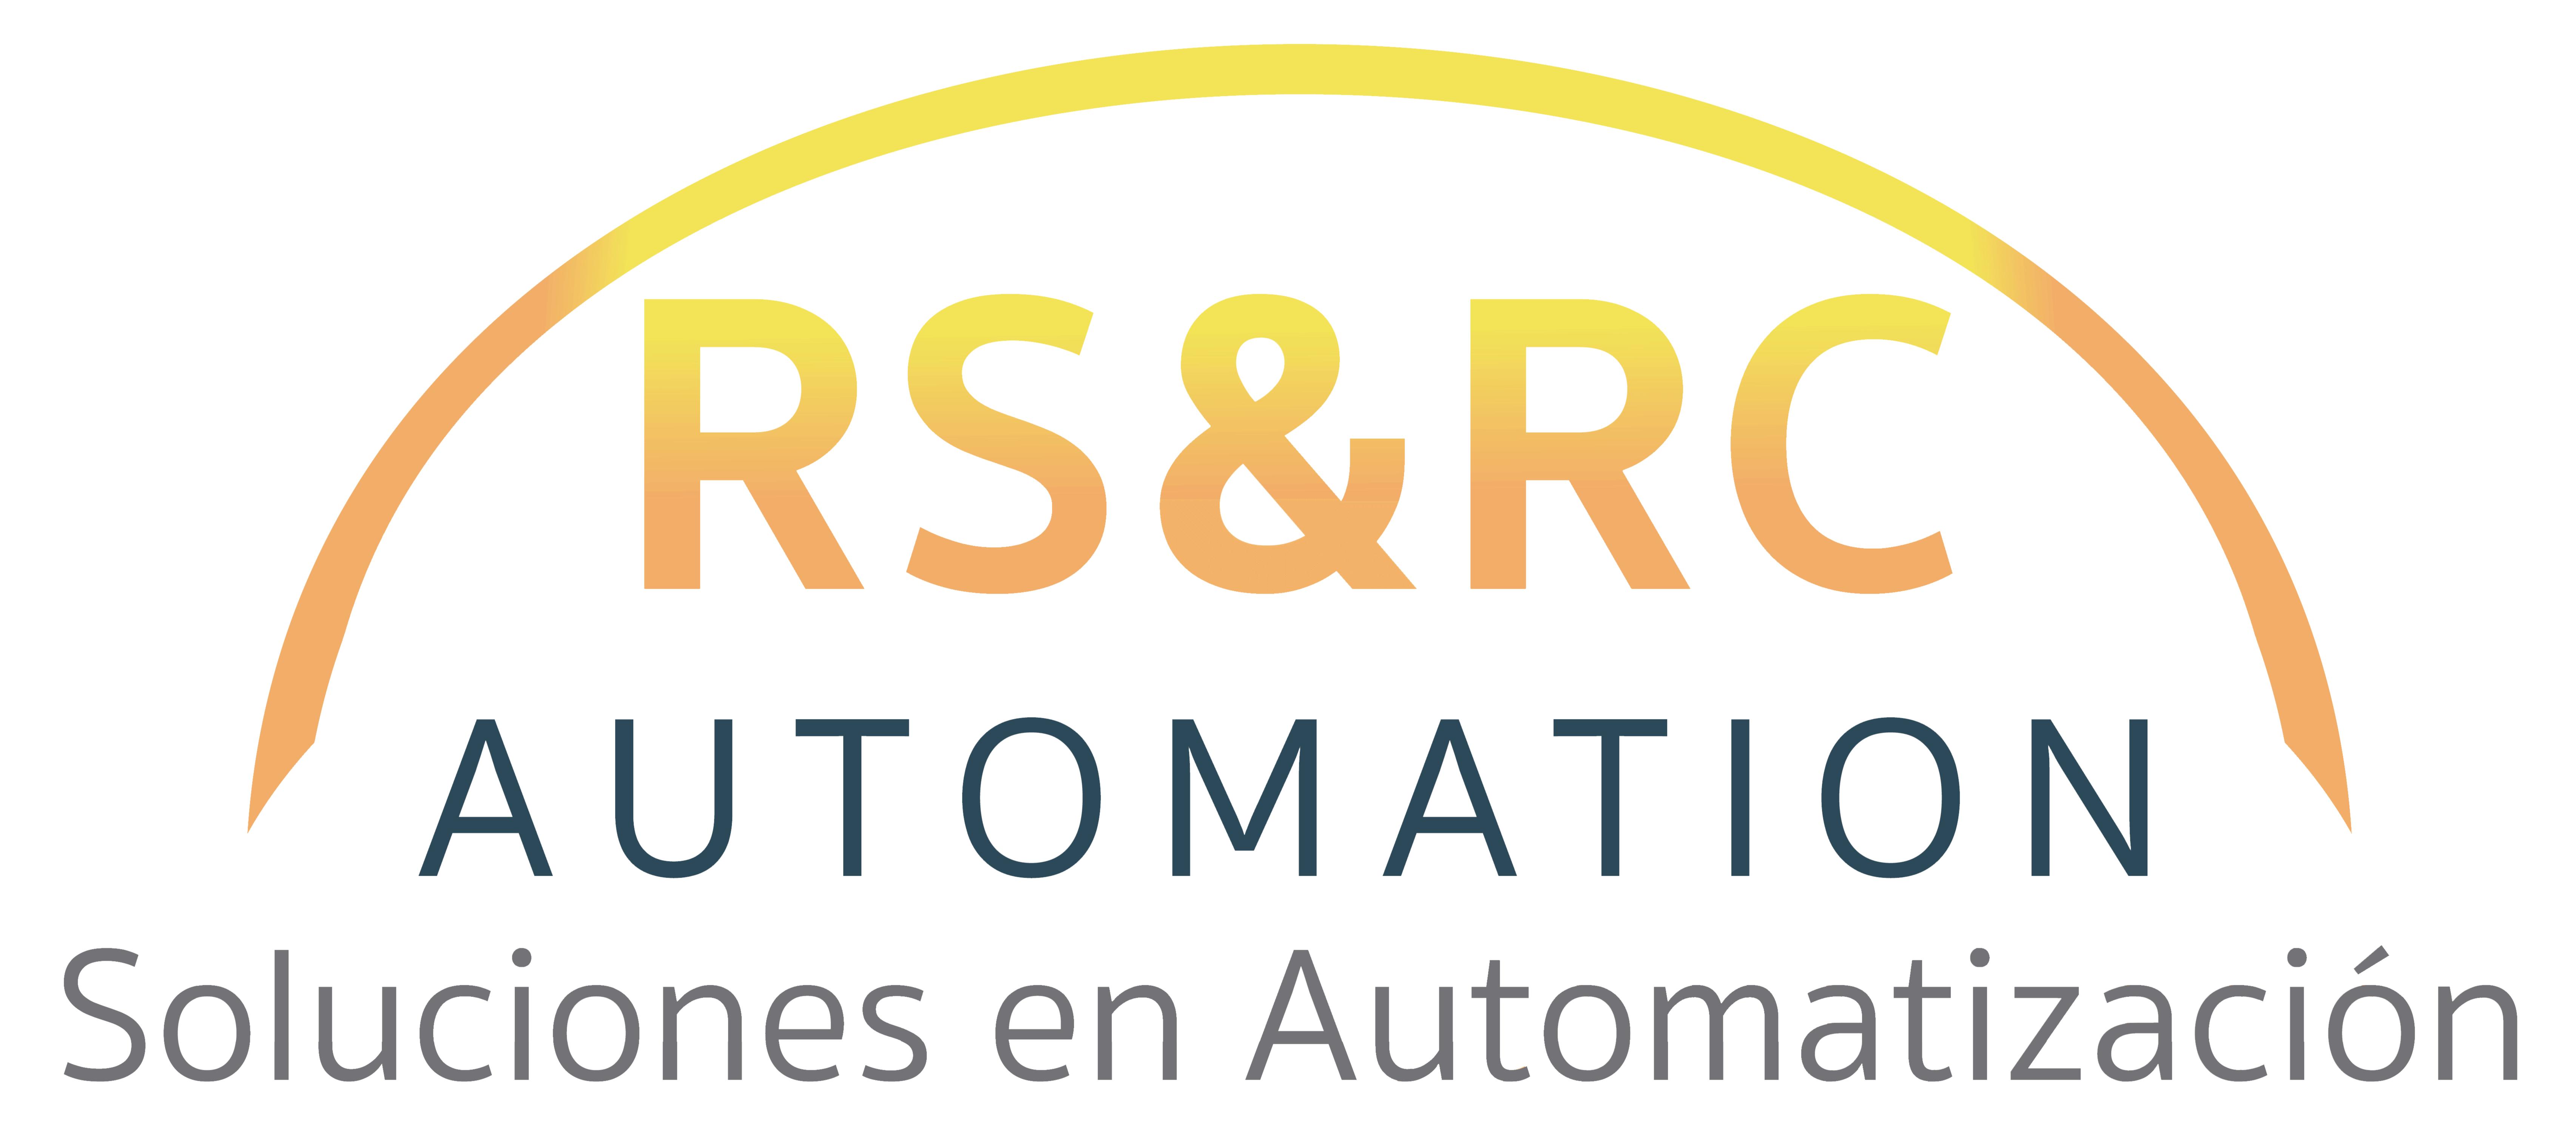 RS&RC AUTOMATION